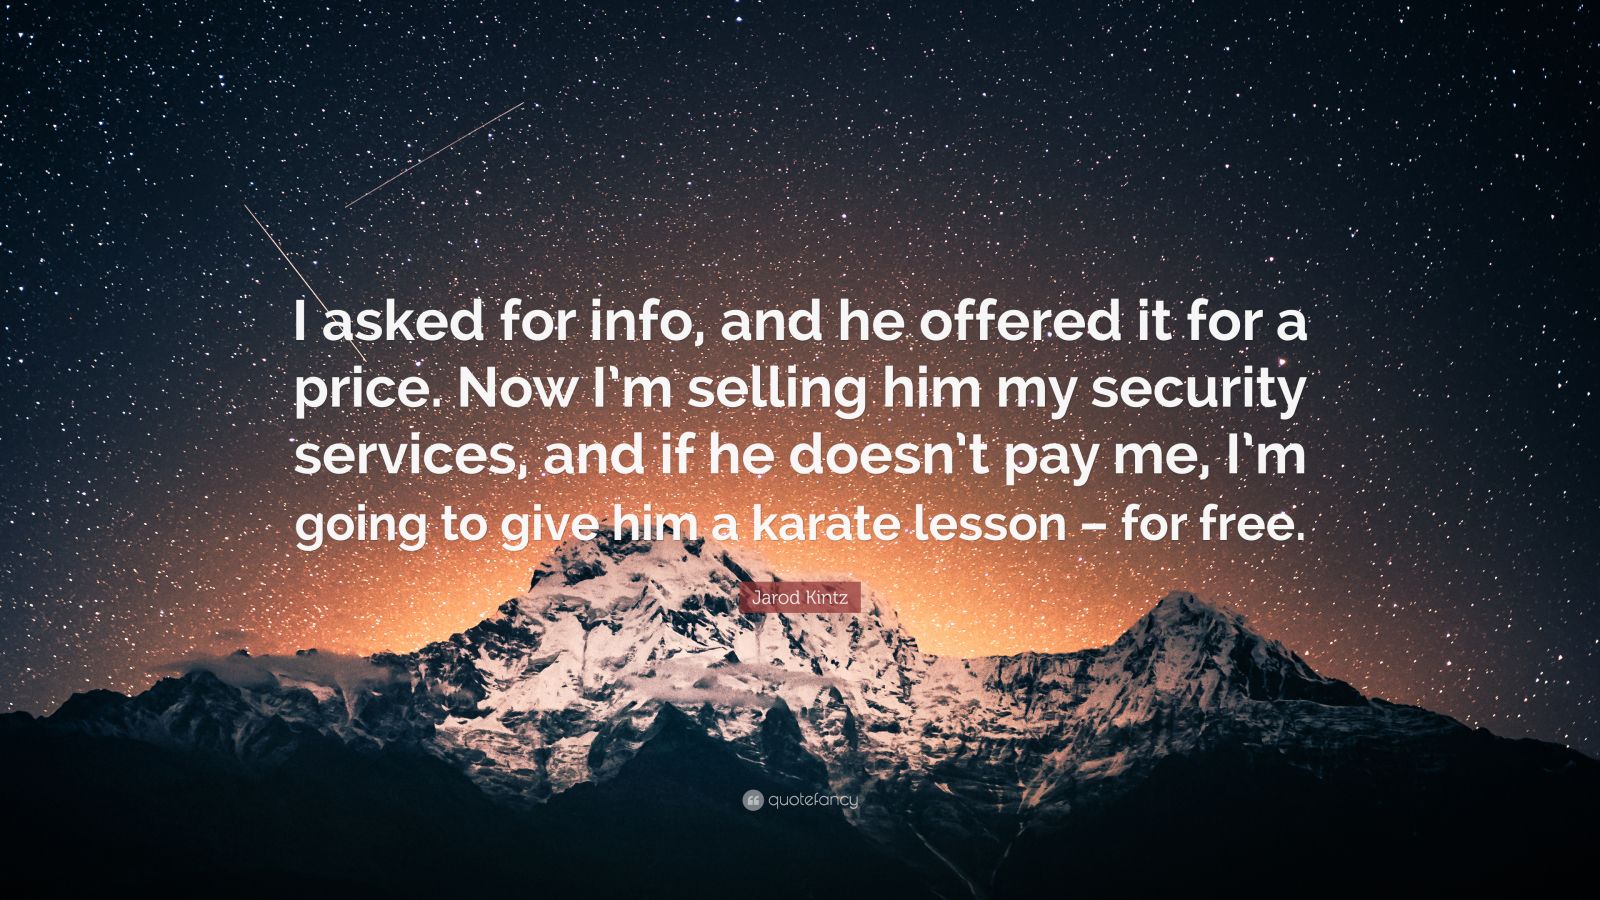 https://quotefancy.com/media/wallpaper/1600x900/6411402-Jarod-Kintz-Quote-I-asked-for-info-and-he-offered-it-for-a-price.jpg